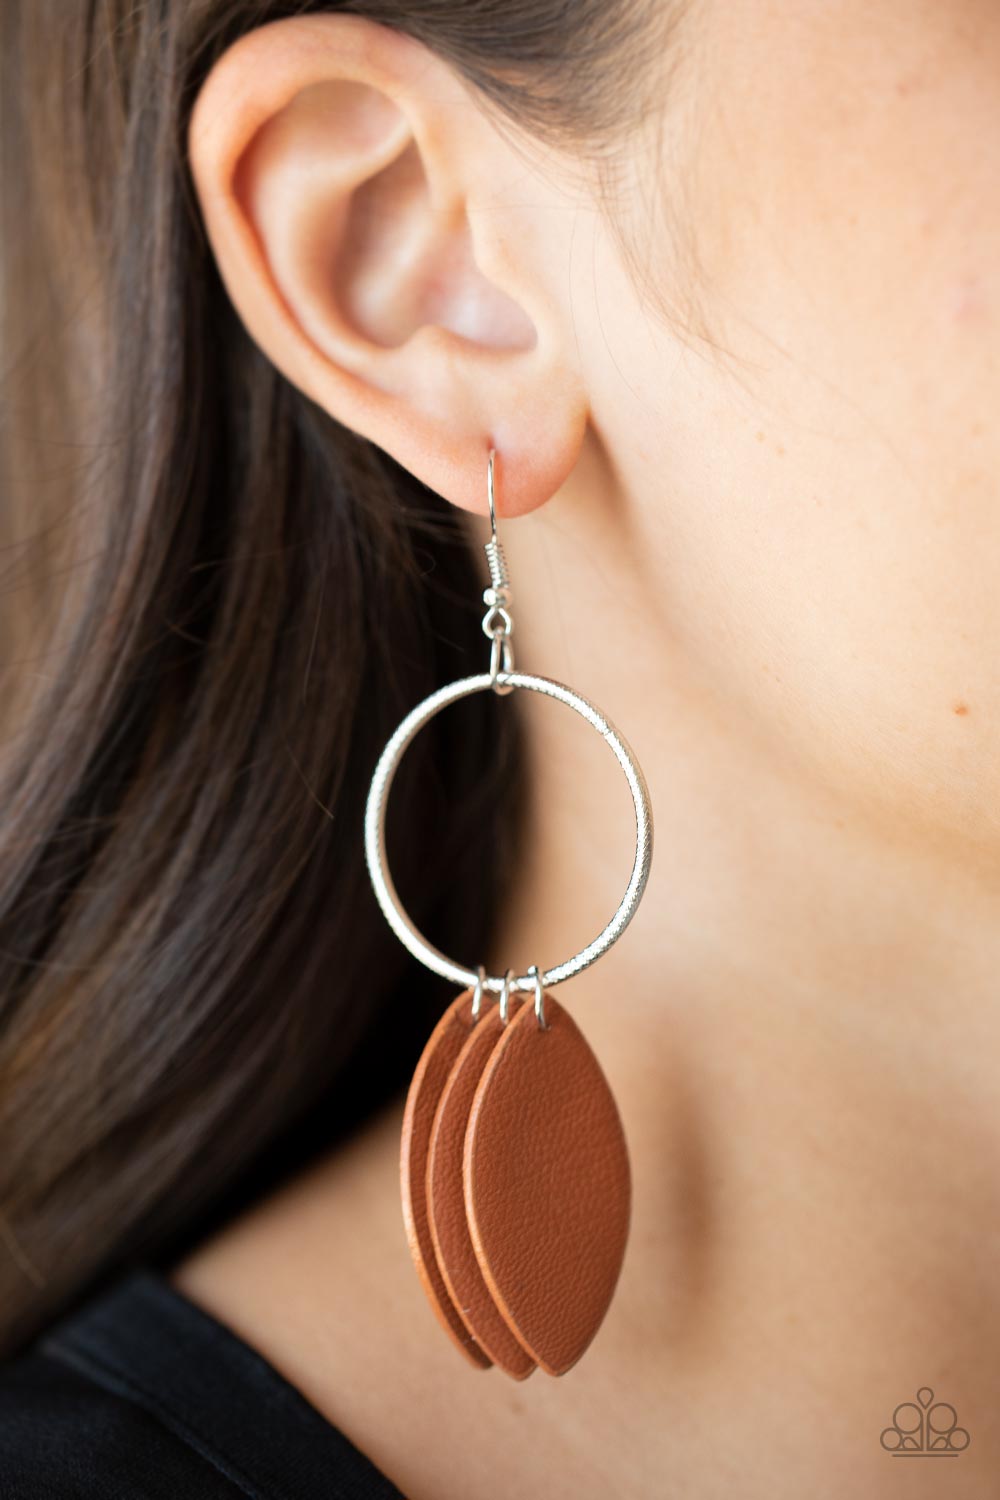 Leafy Laguna Brown Paparazzi Earrings Cashmere Pink Jewels